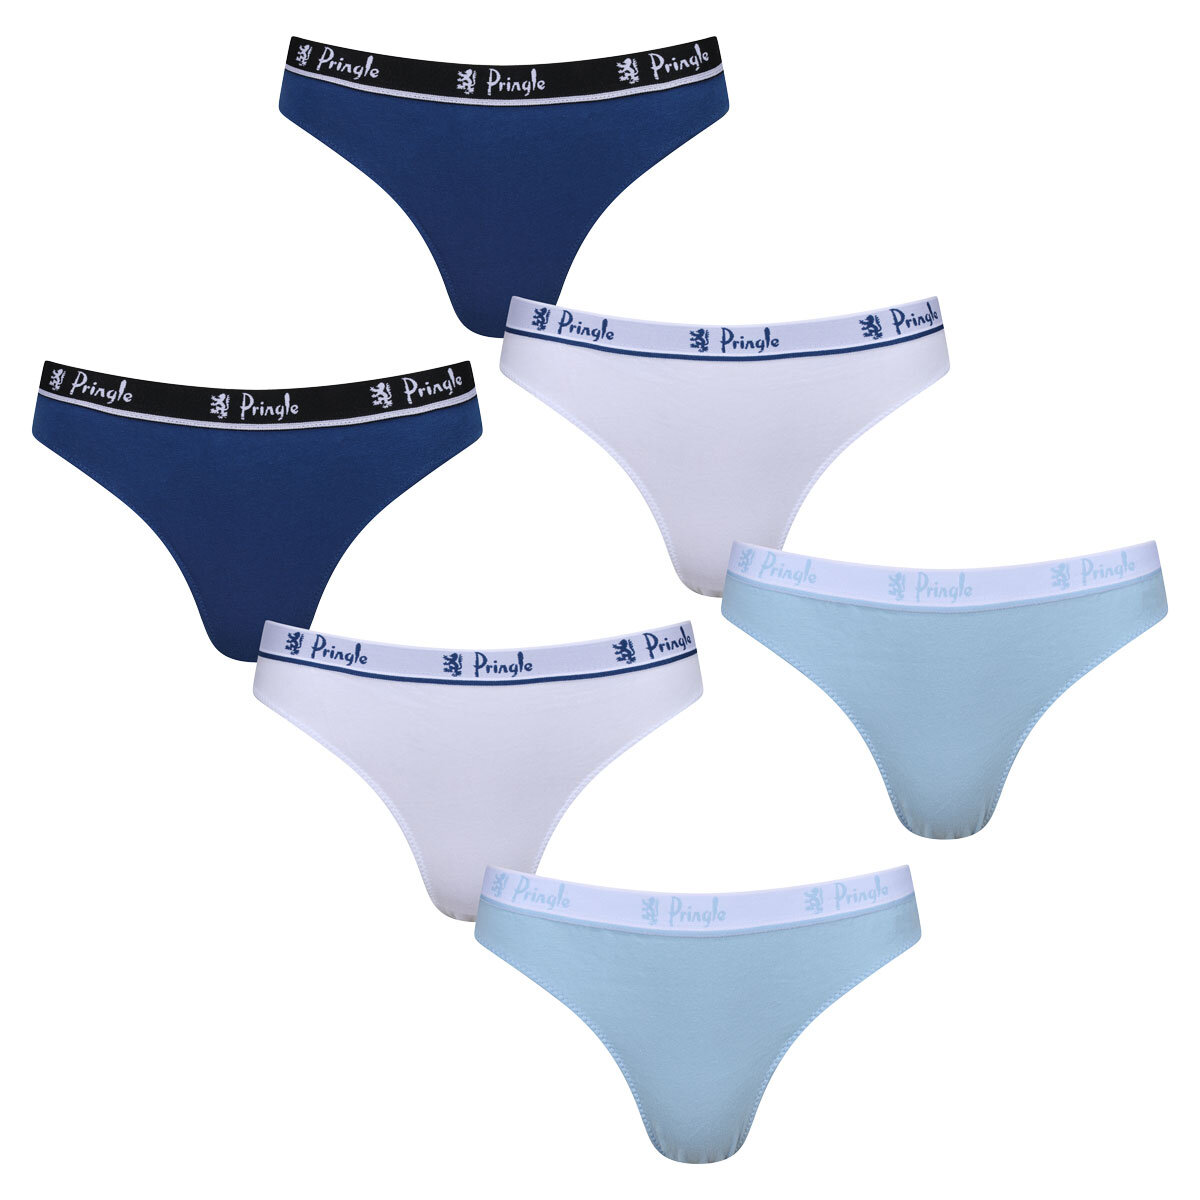 Pringle Ladies High Rise Brief, 2 x 3 Pack in 3 Colours and 3 Sizes